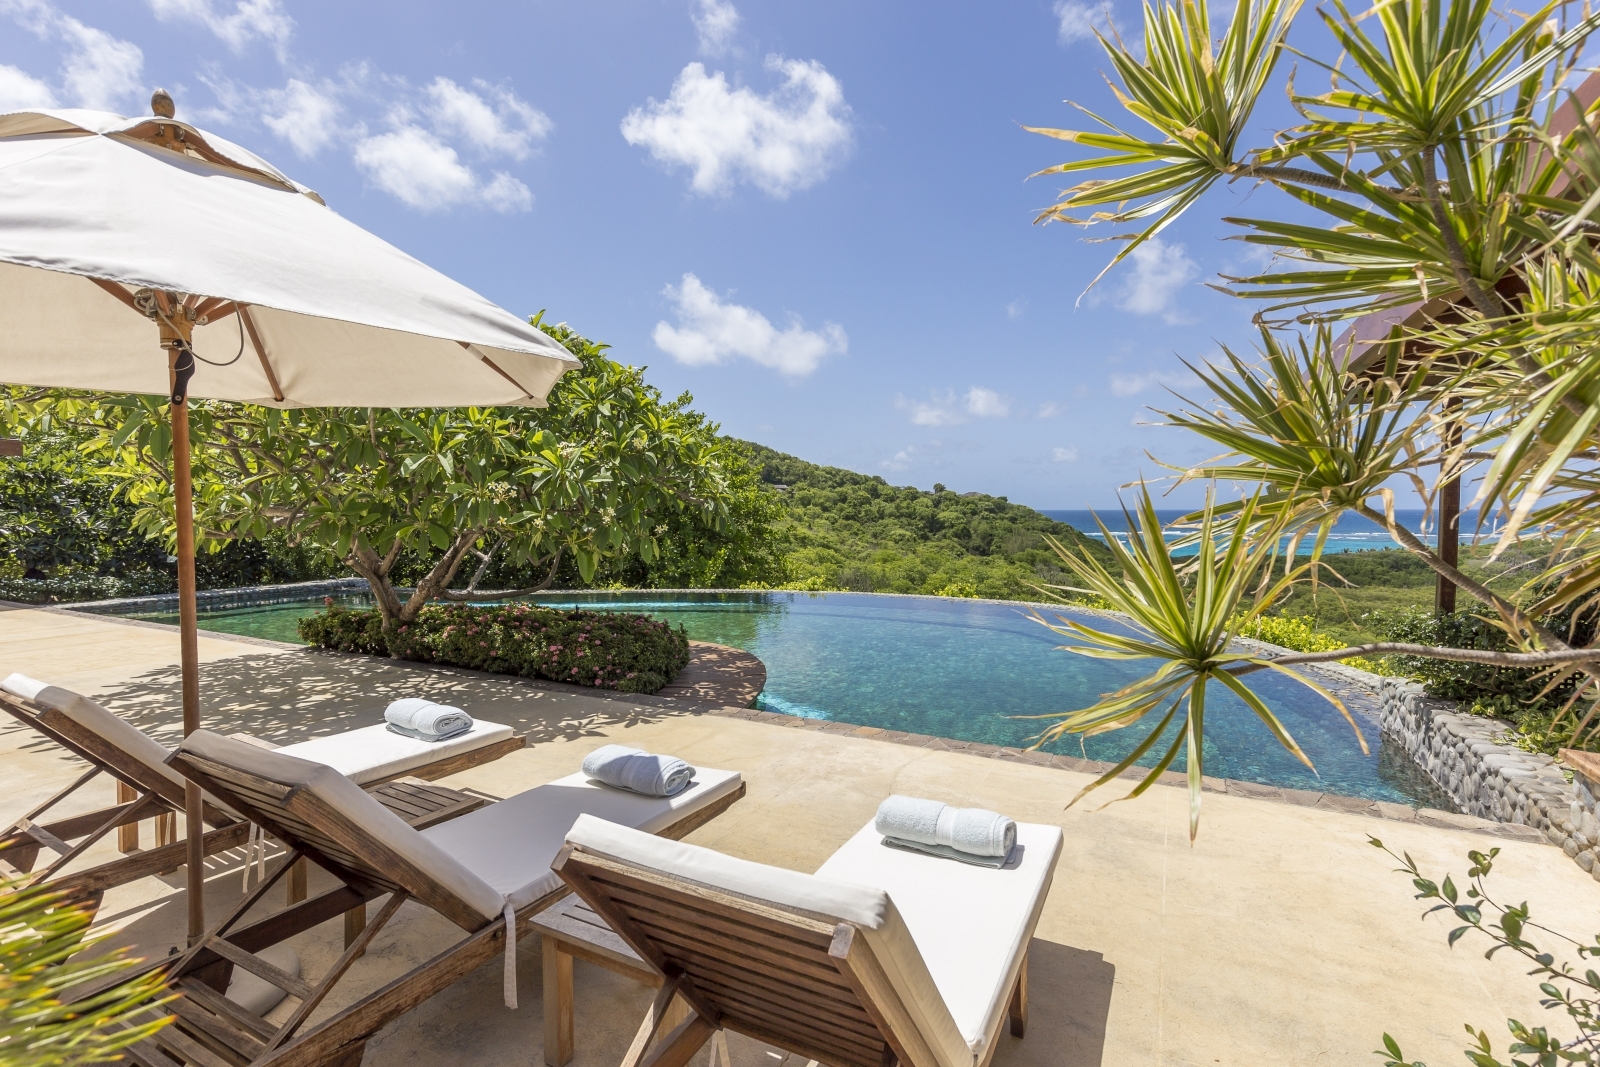 Pool and view at Serenissima in Mustique